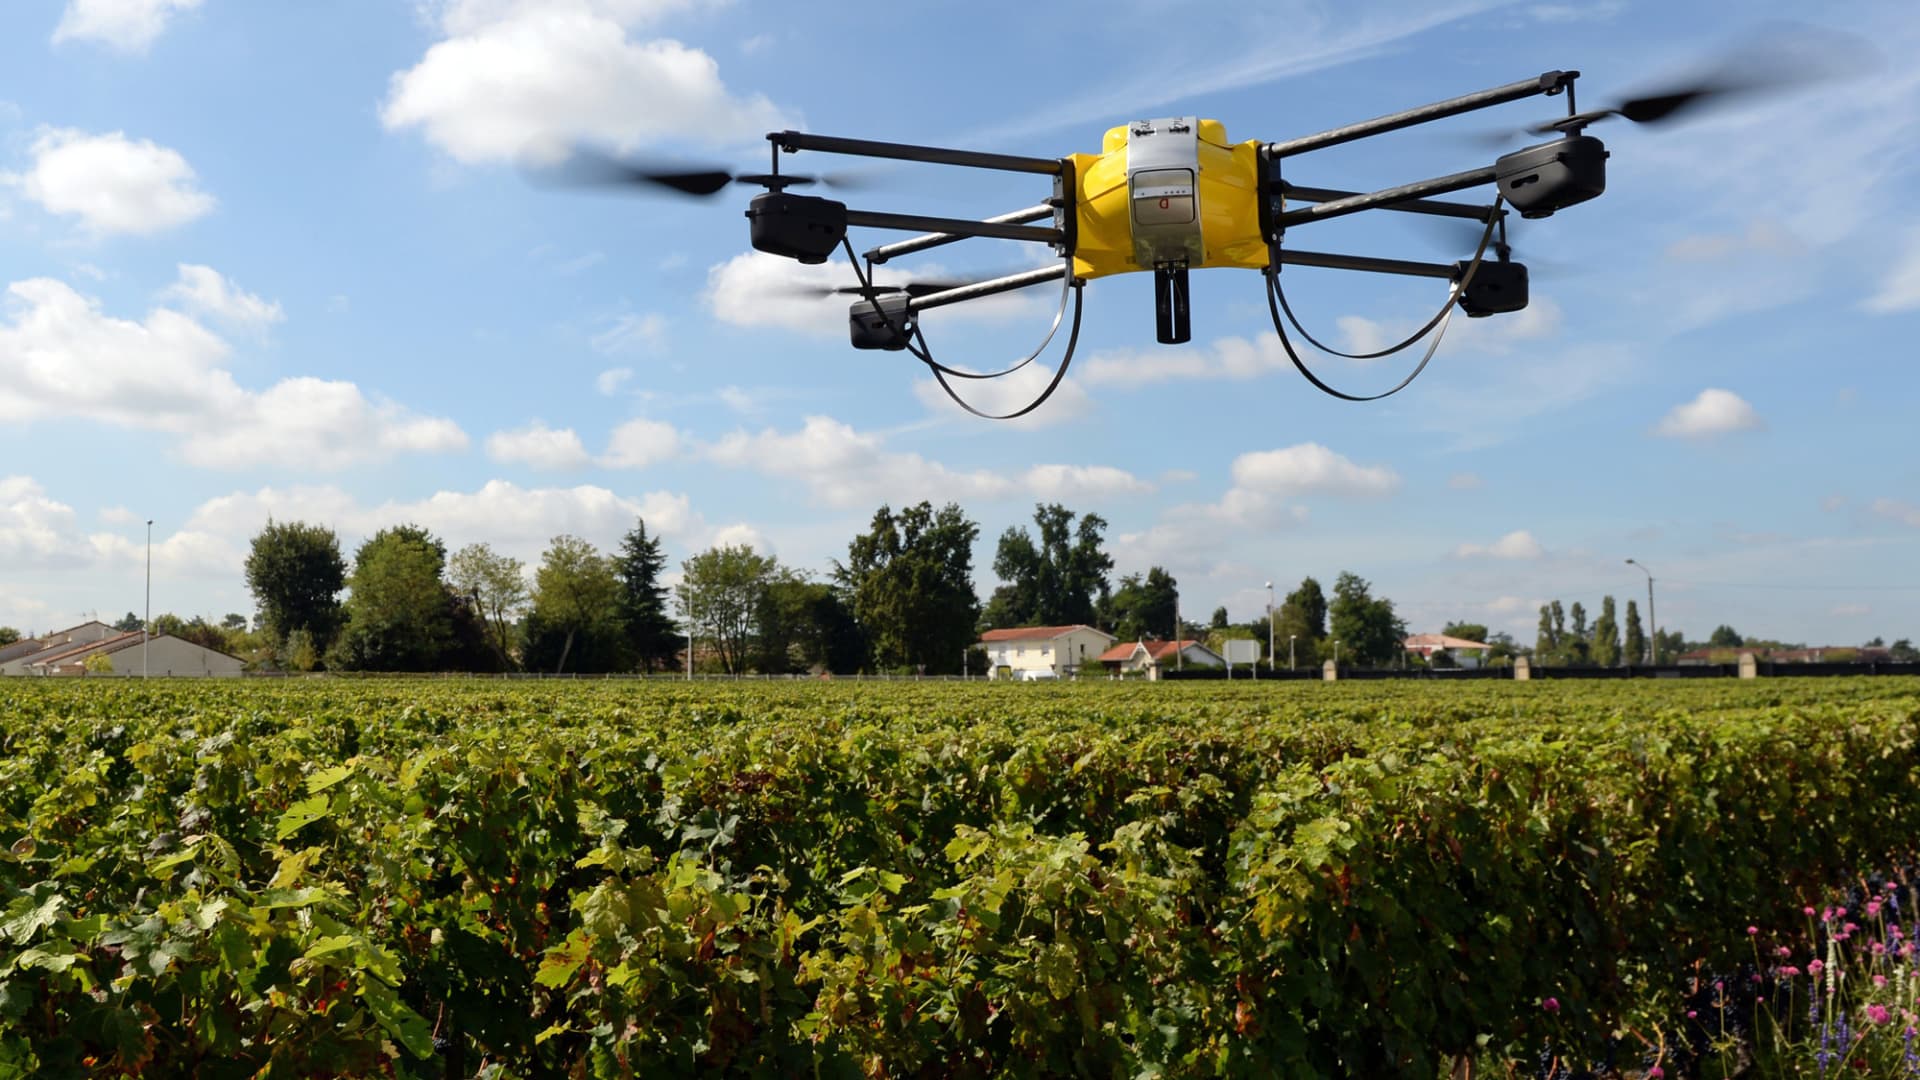 A drone flying over vineyards in Pessac, France